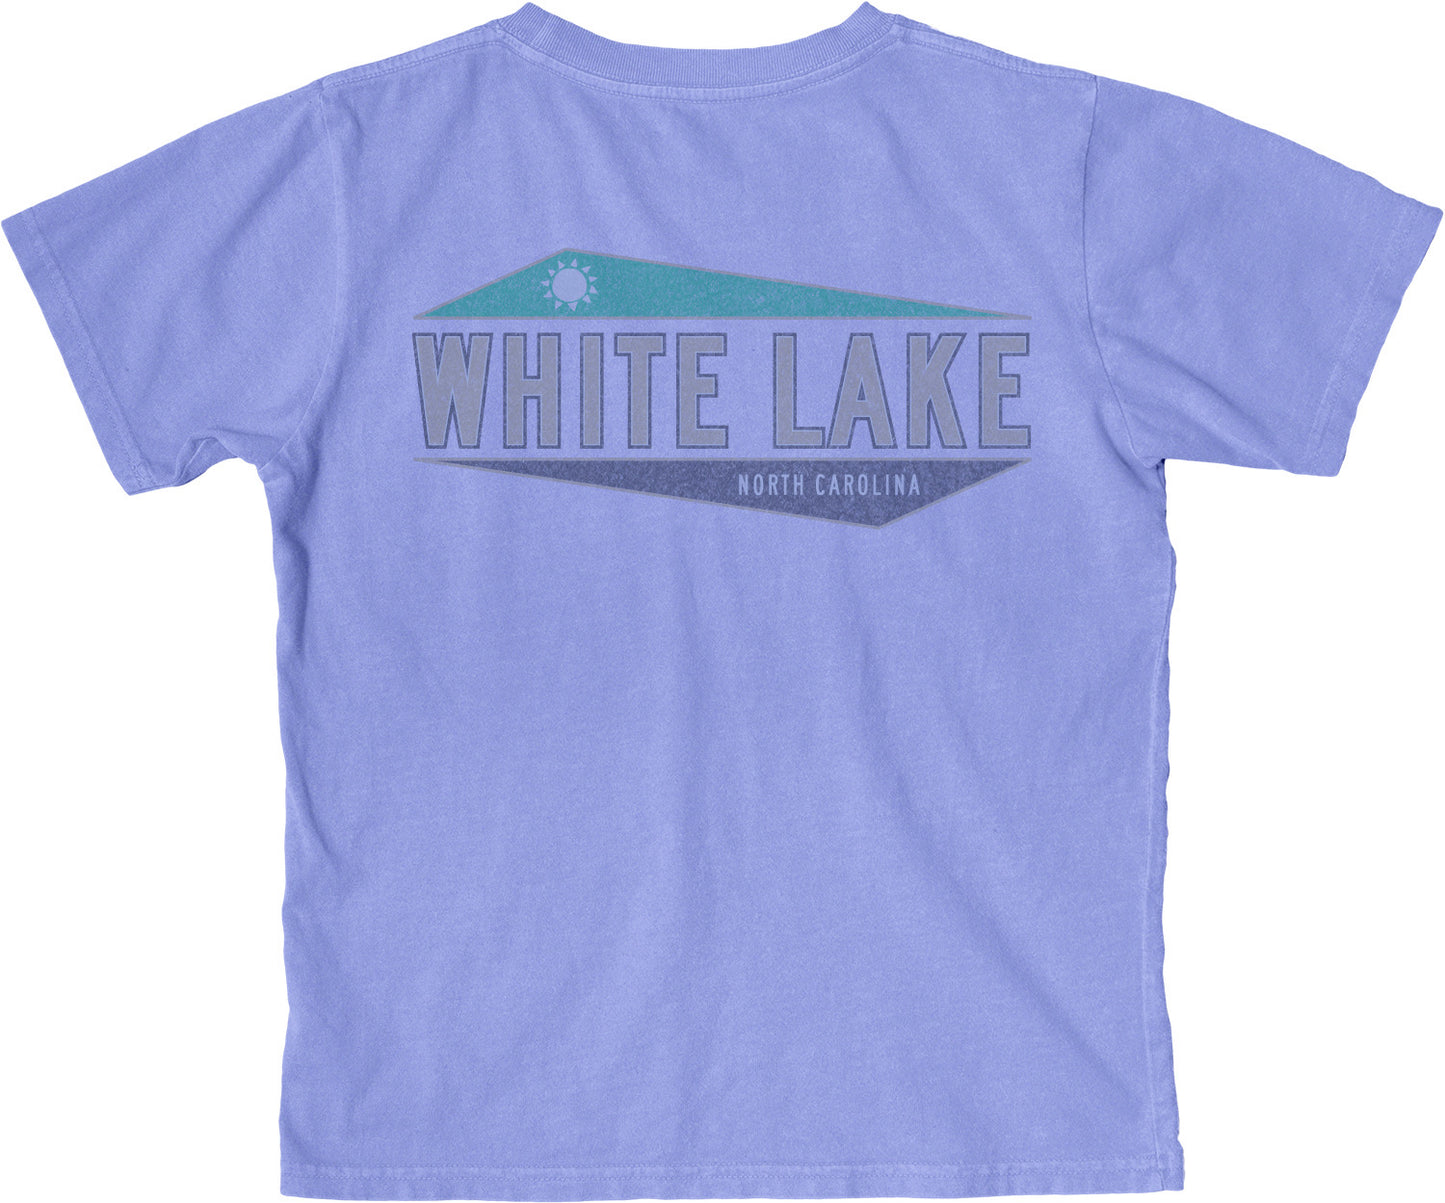 White Lake Tee Youth - Contraption Periwinkle Blue